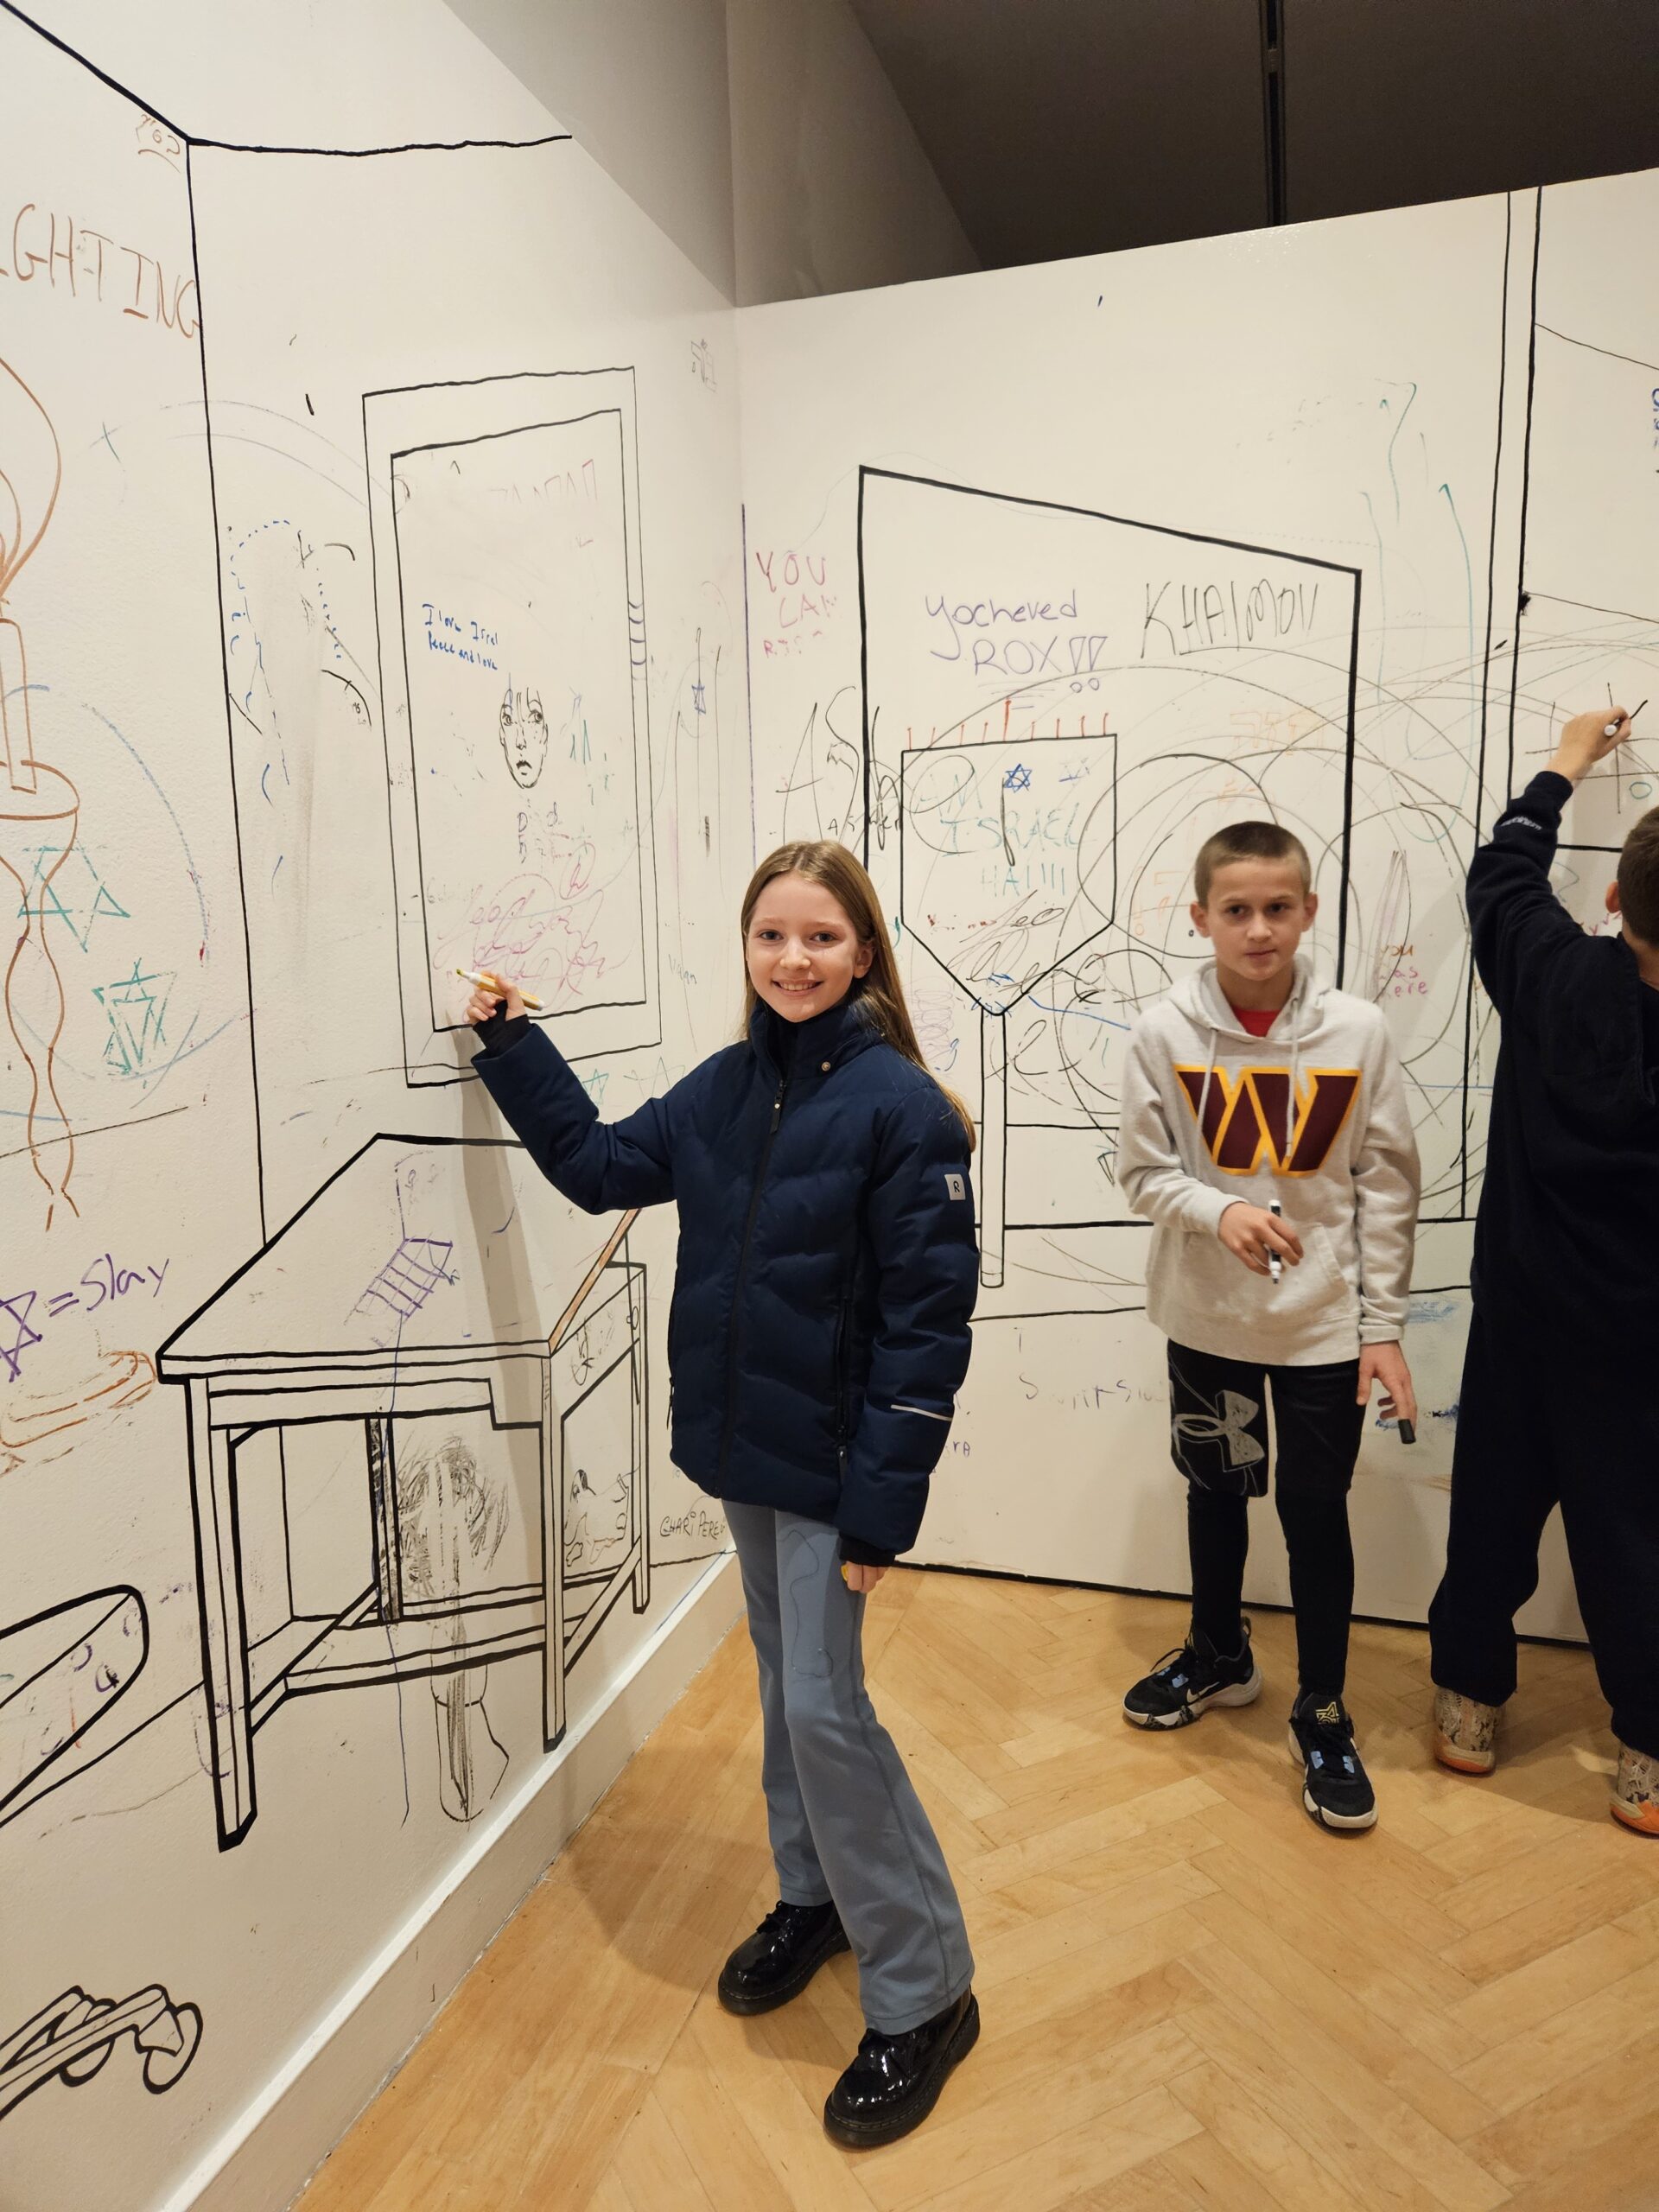 ECFS student poses in front of large whiteboard at Jewish experience museum.